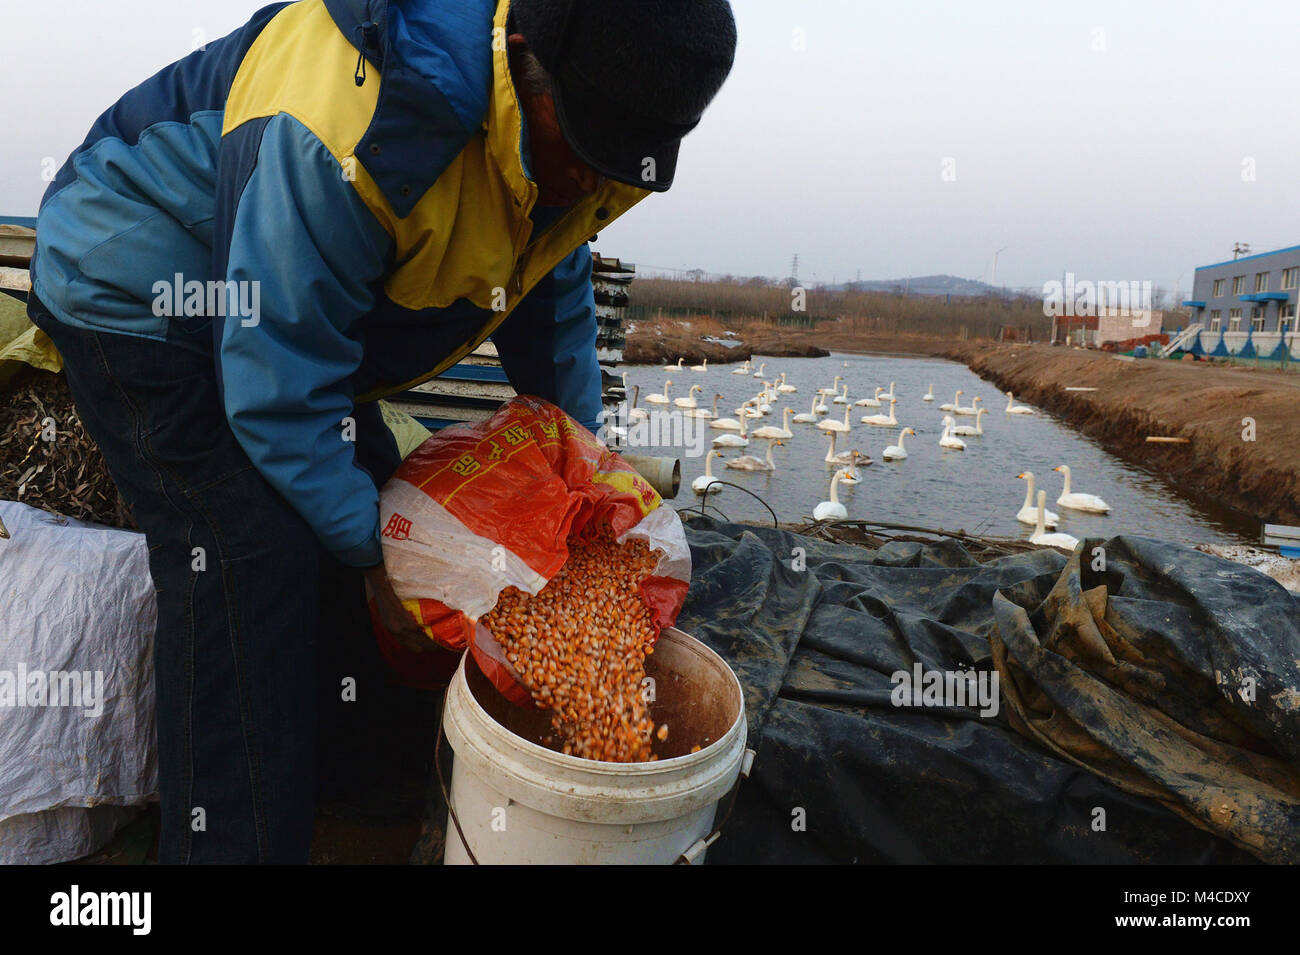 (180216) -- JINAN, Feb. 16, 2018 (Xinhua) -- Yuan Xueshun prepares food for swans at home in Chengshan Town of Rongcheng City, east China's Shandong Province, Feb. 14, 2018. Yuan Xueshun, dubbed as 'swan guard,' has devoted himeself to the protection of swans for over 40 years. He has rescued more than 1,000 sick or wounded swans and succeeded in preventing more than 1,000 mu (66.67 hectares) of wetland from being destroyed since 1975. Thanks to the efforts made by people like Yuan, the Swan Lake in Rongcheng has become an ideal habitat for swans in winter. (Xinhua/Feng Jie) (mp) Stock Photo